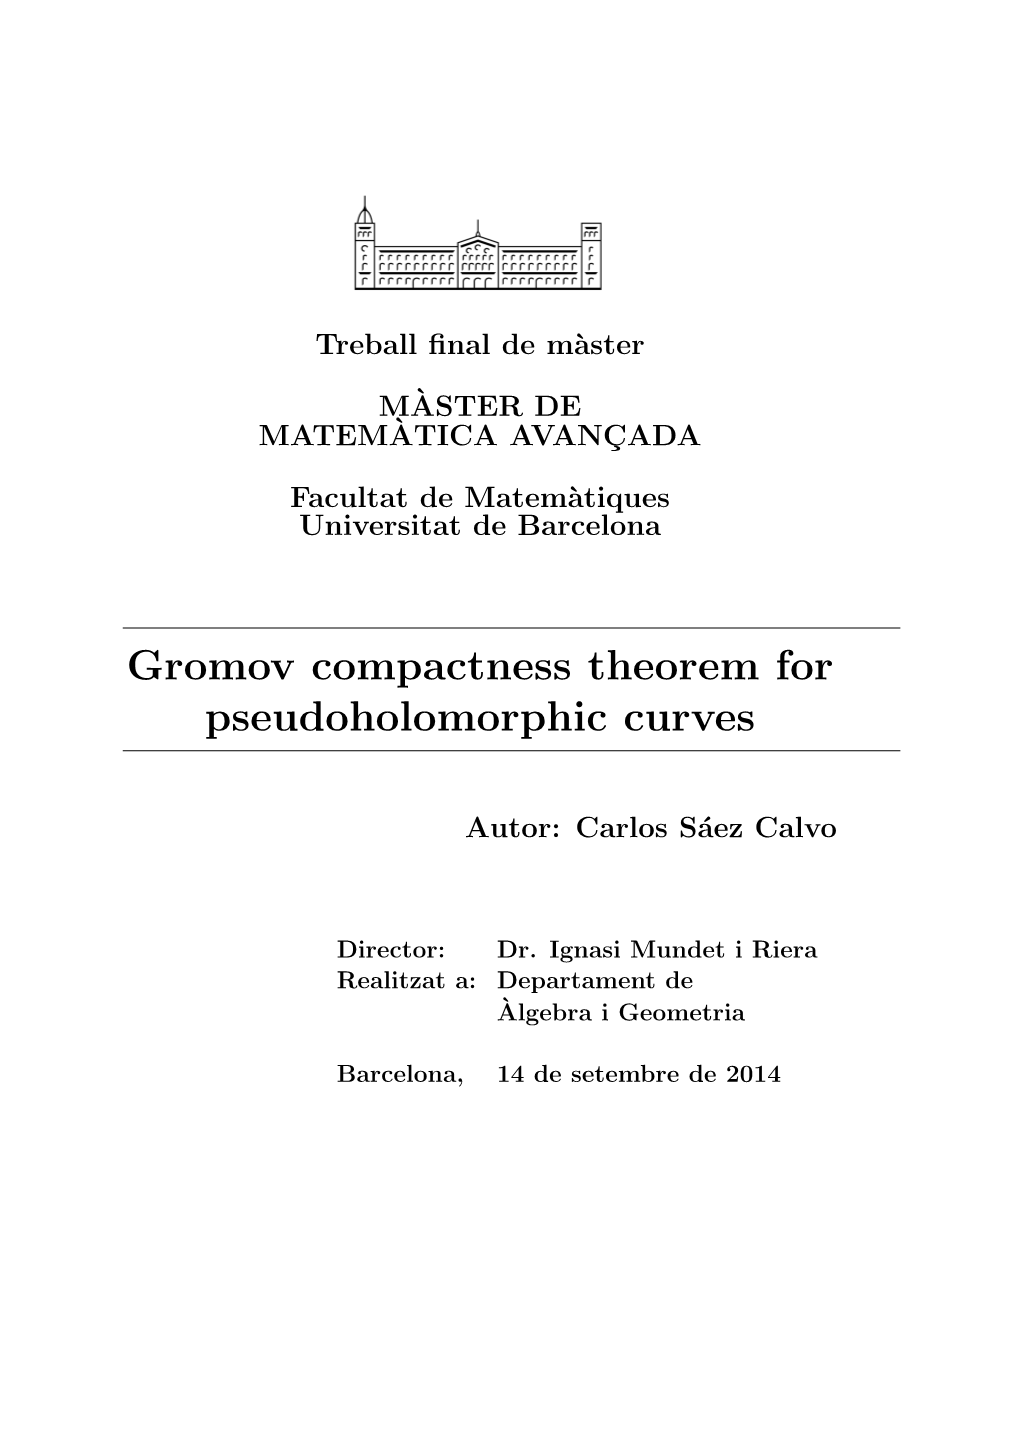 Gromov Compactness Theorem for Pseudoholomorphic Curves